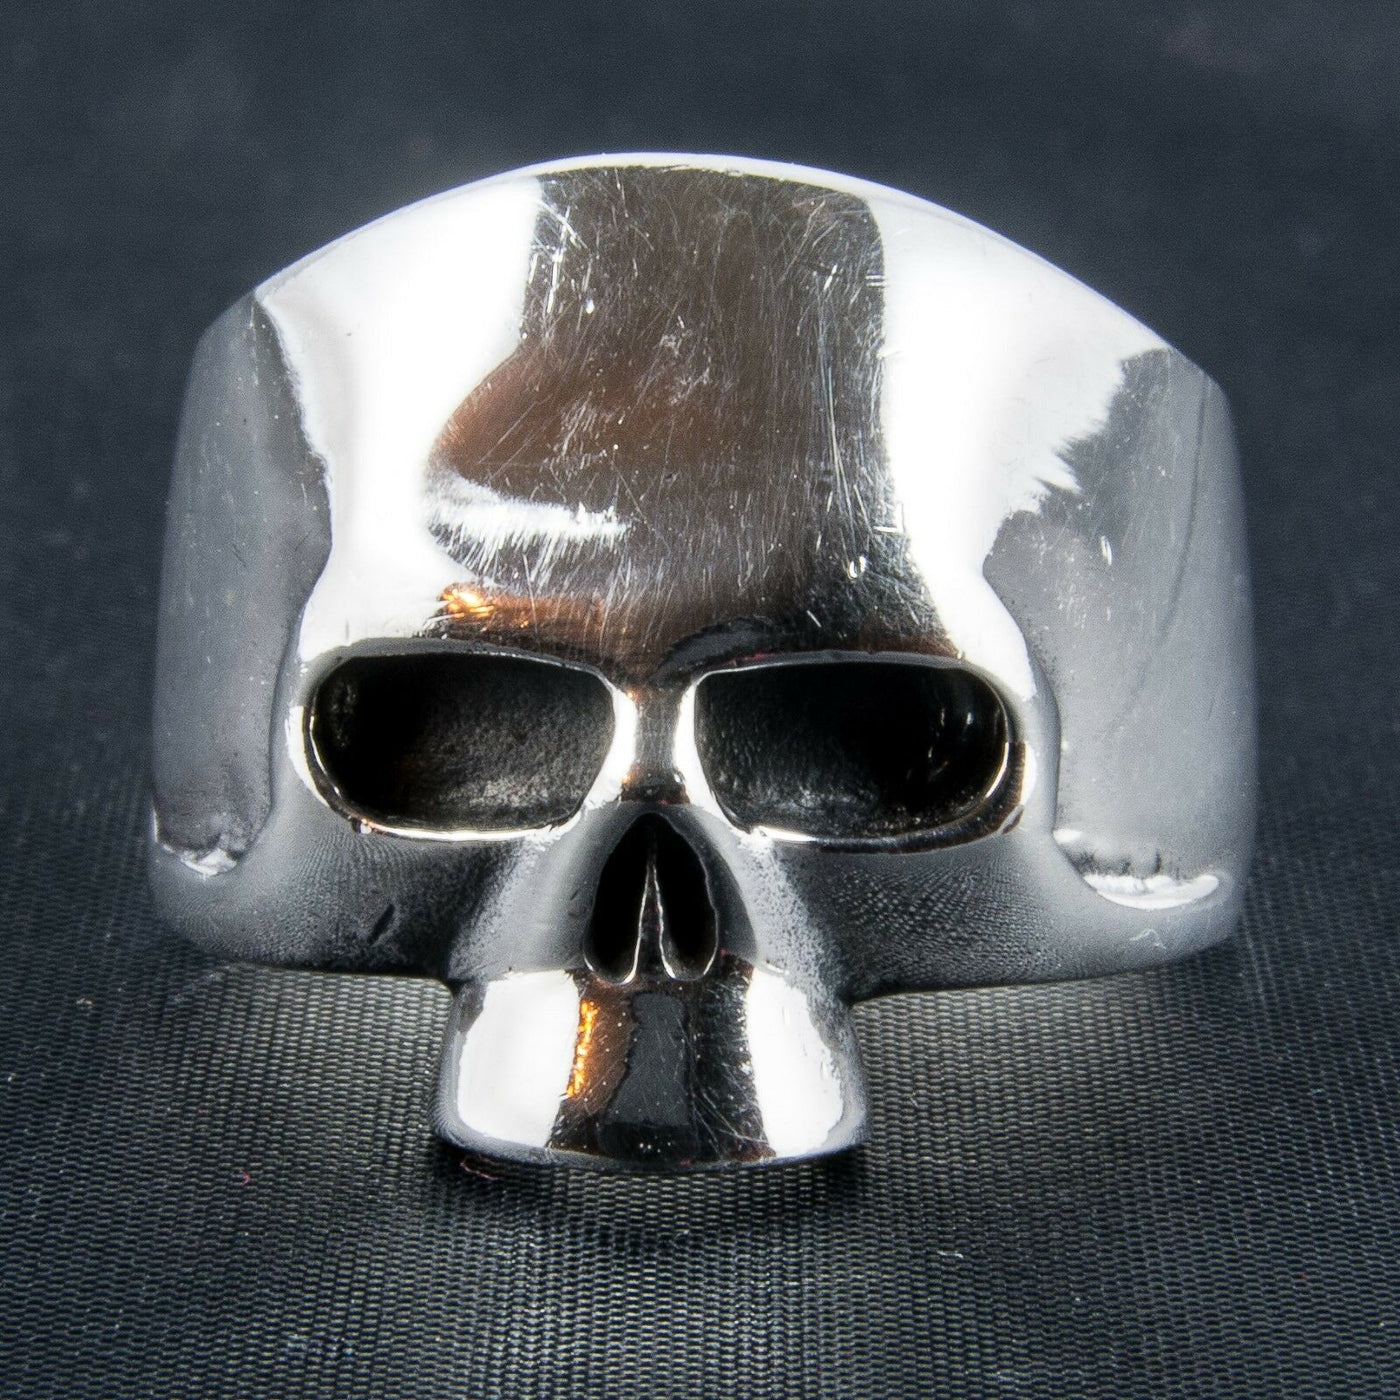 Keith Skull Ring .925 sterling silver polished Biker Heavy Metal feeanddave